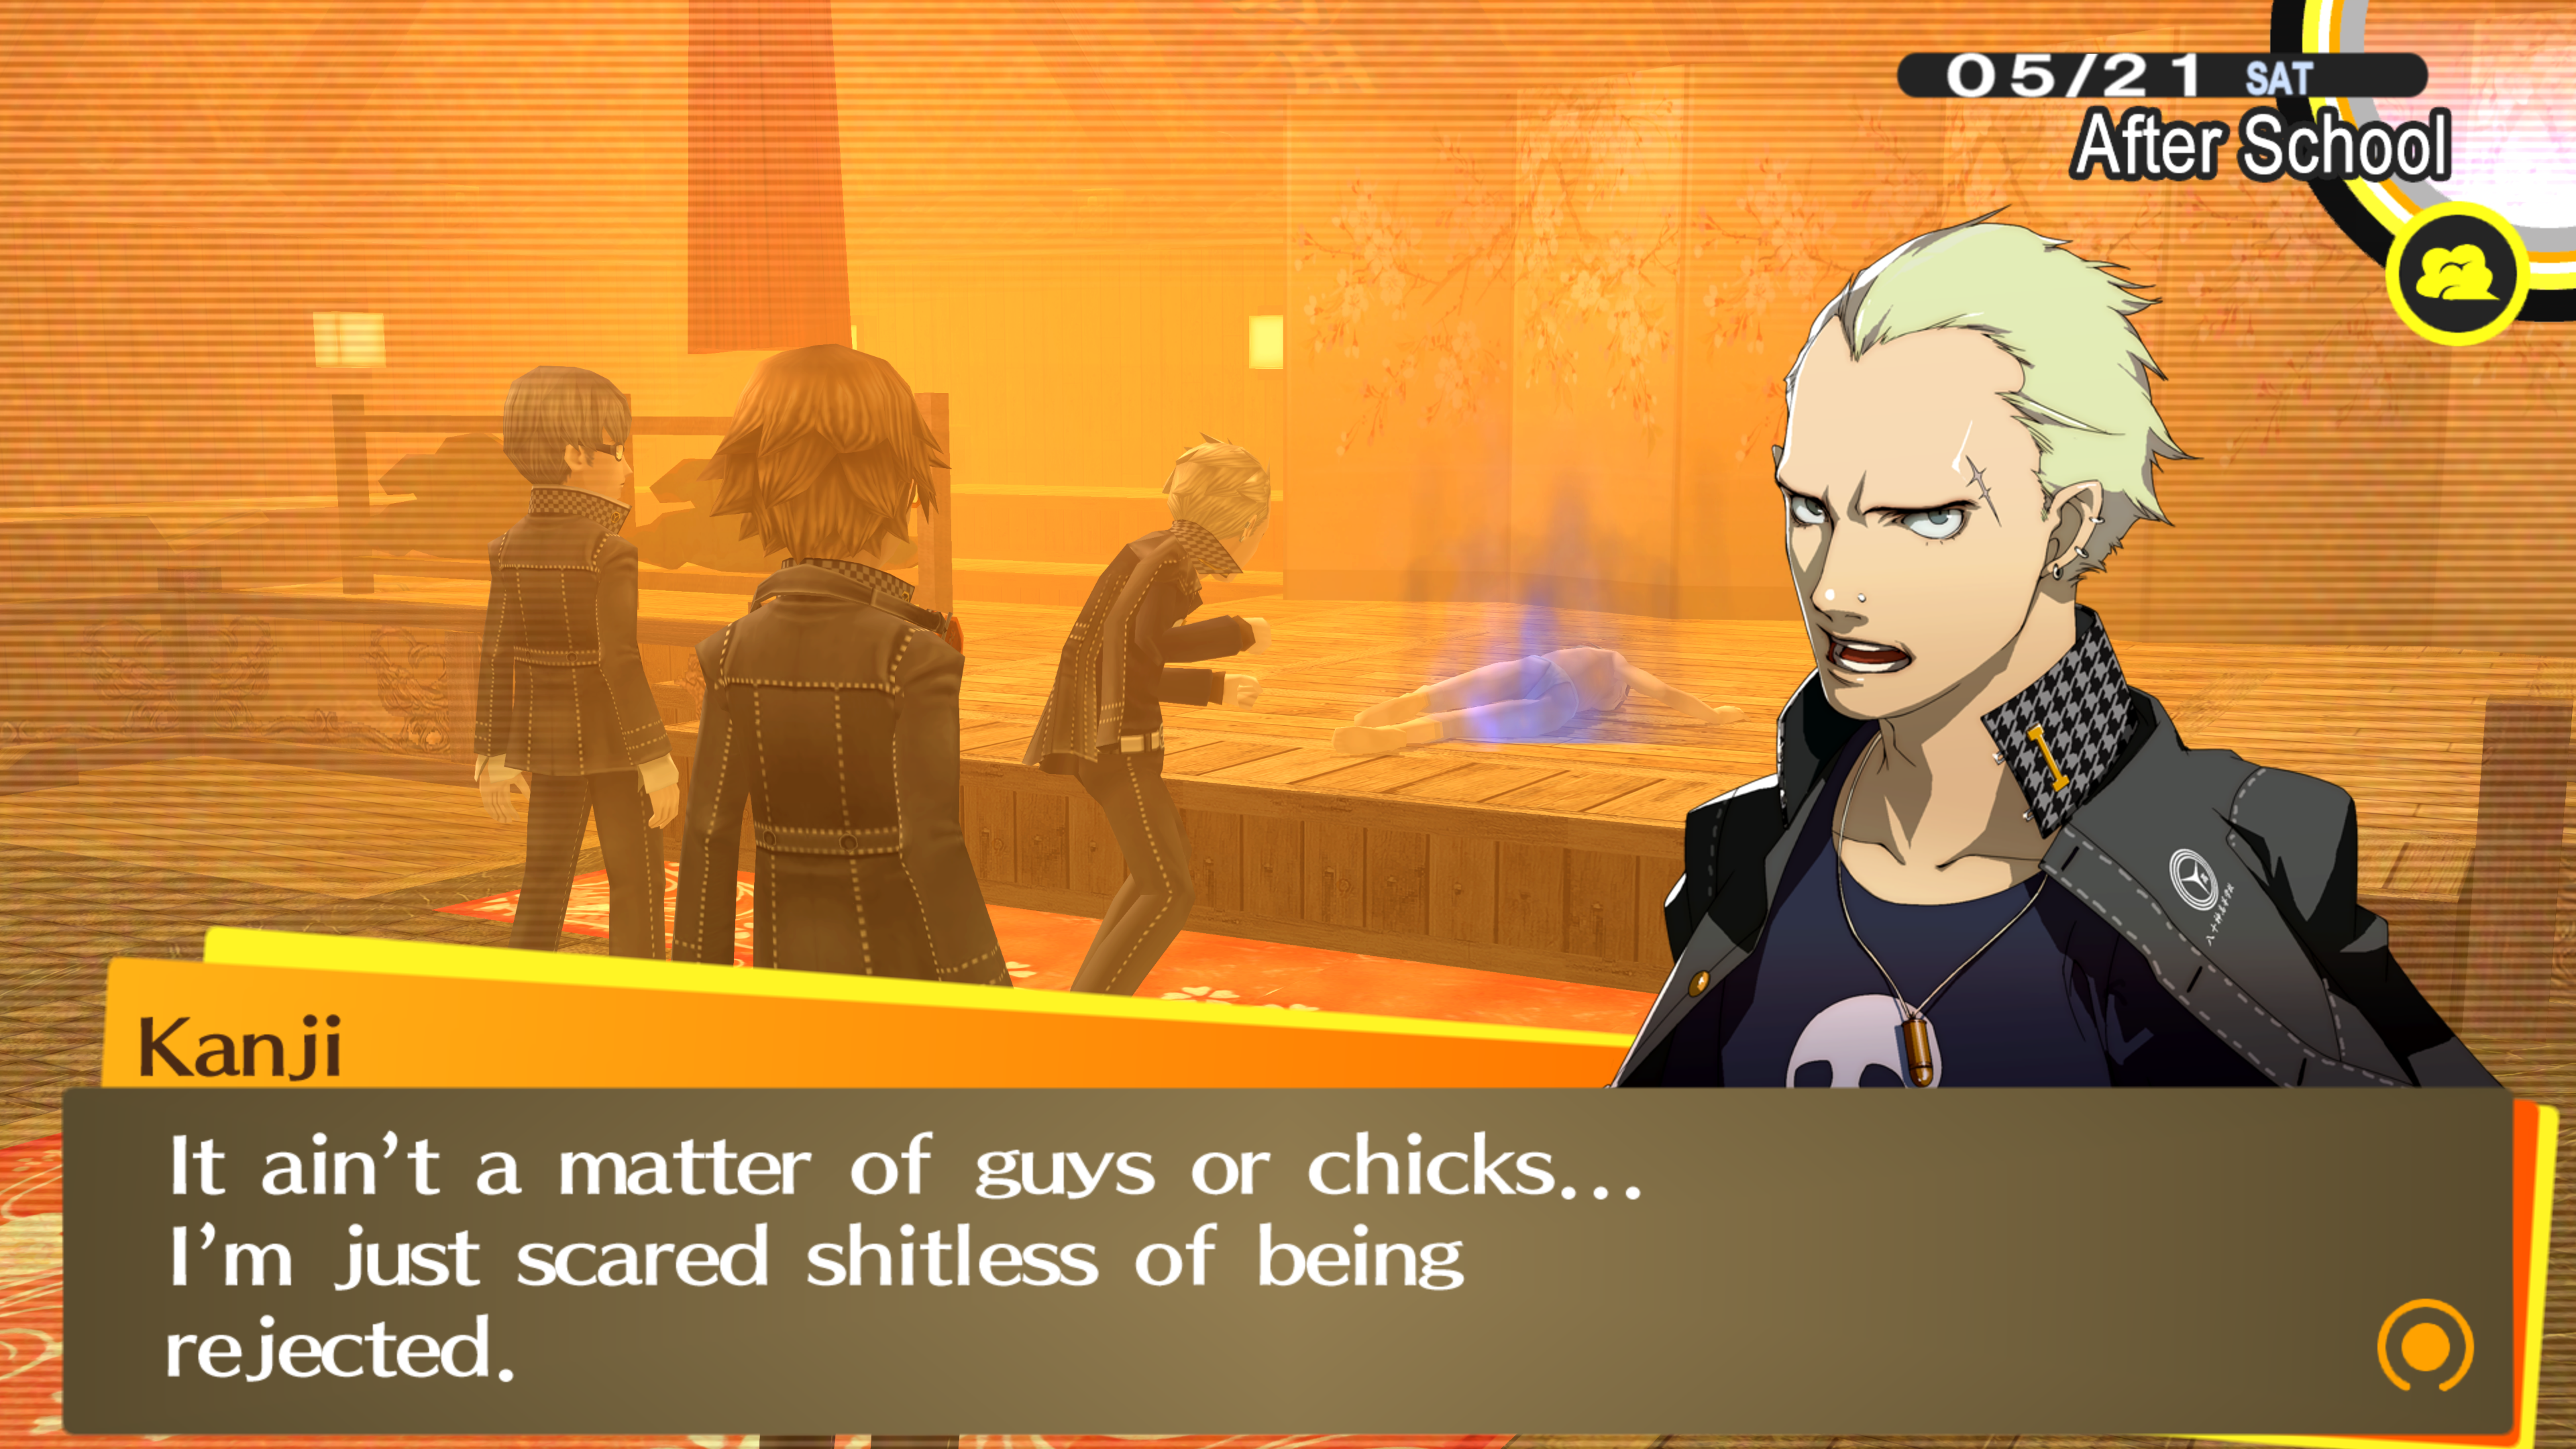 Persona 4 Golden Kanji scared of rejection dialogue